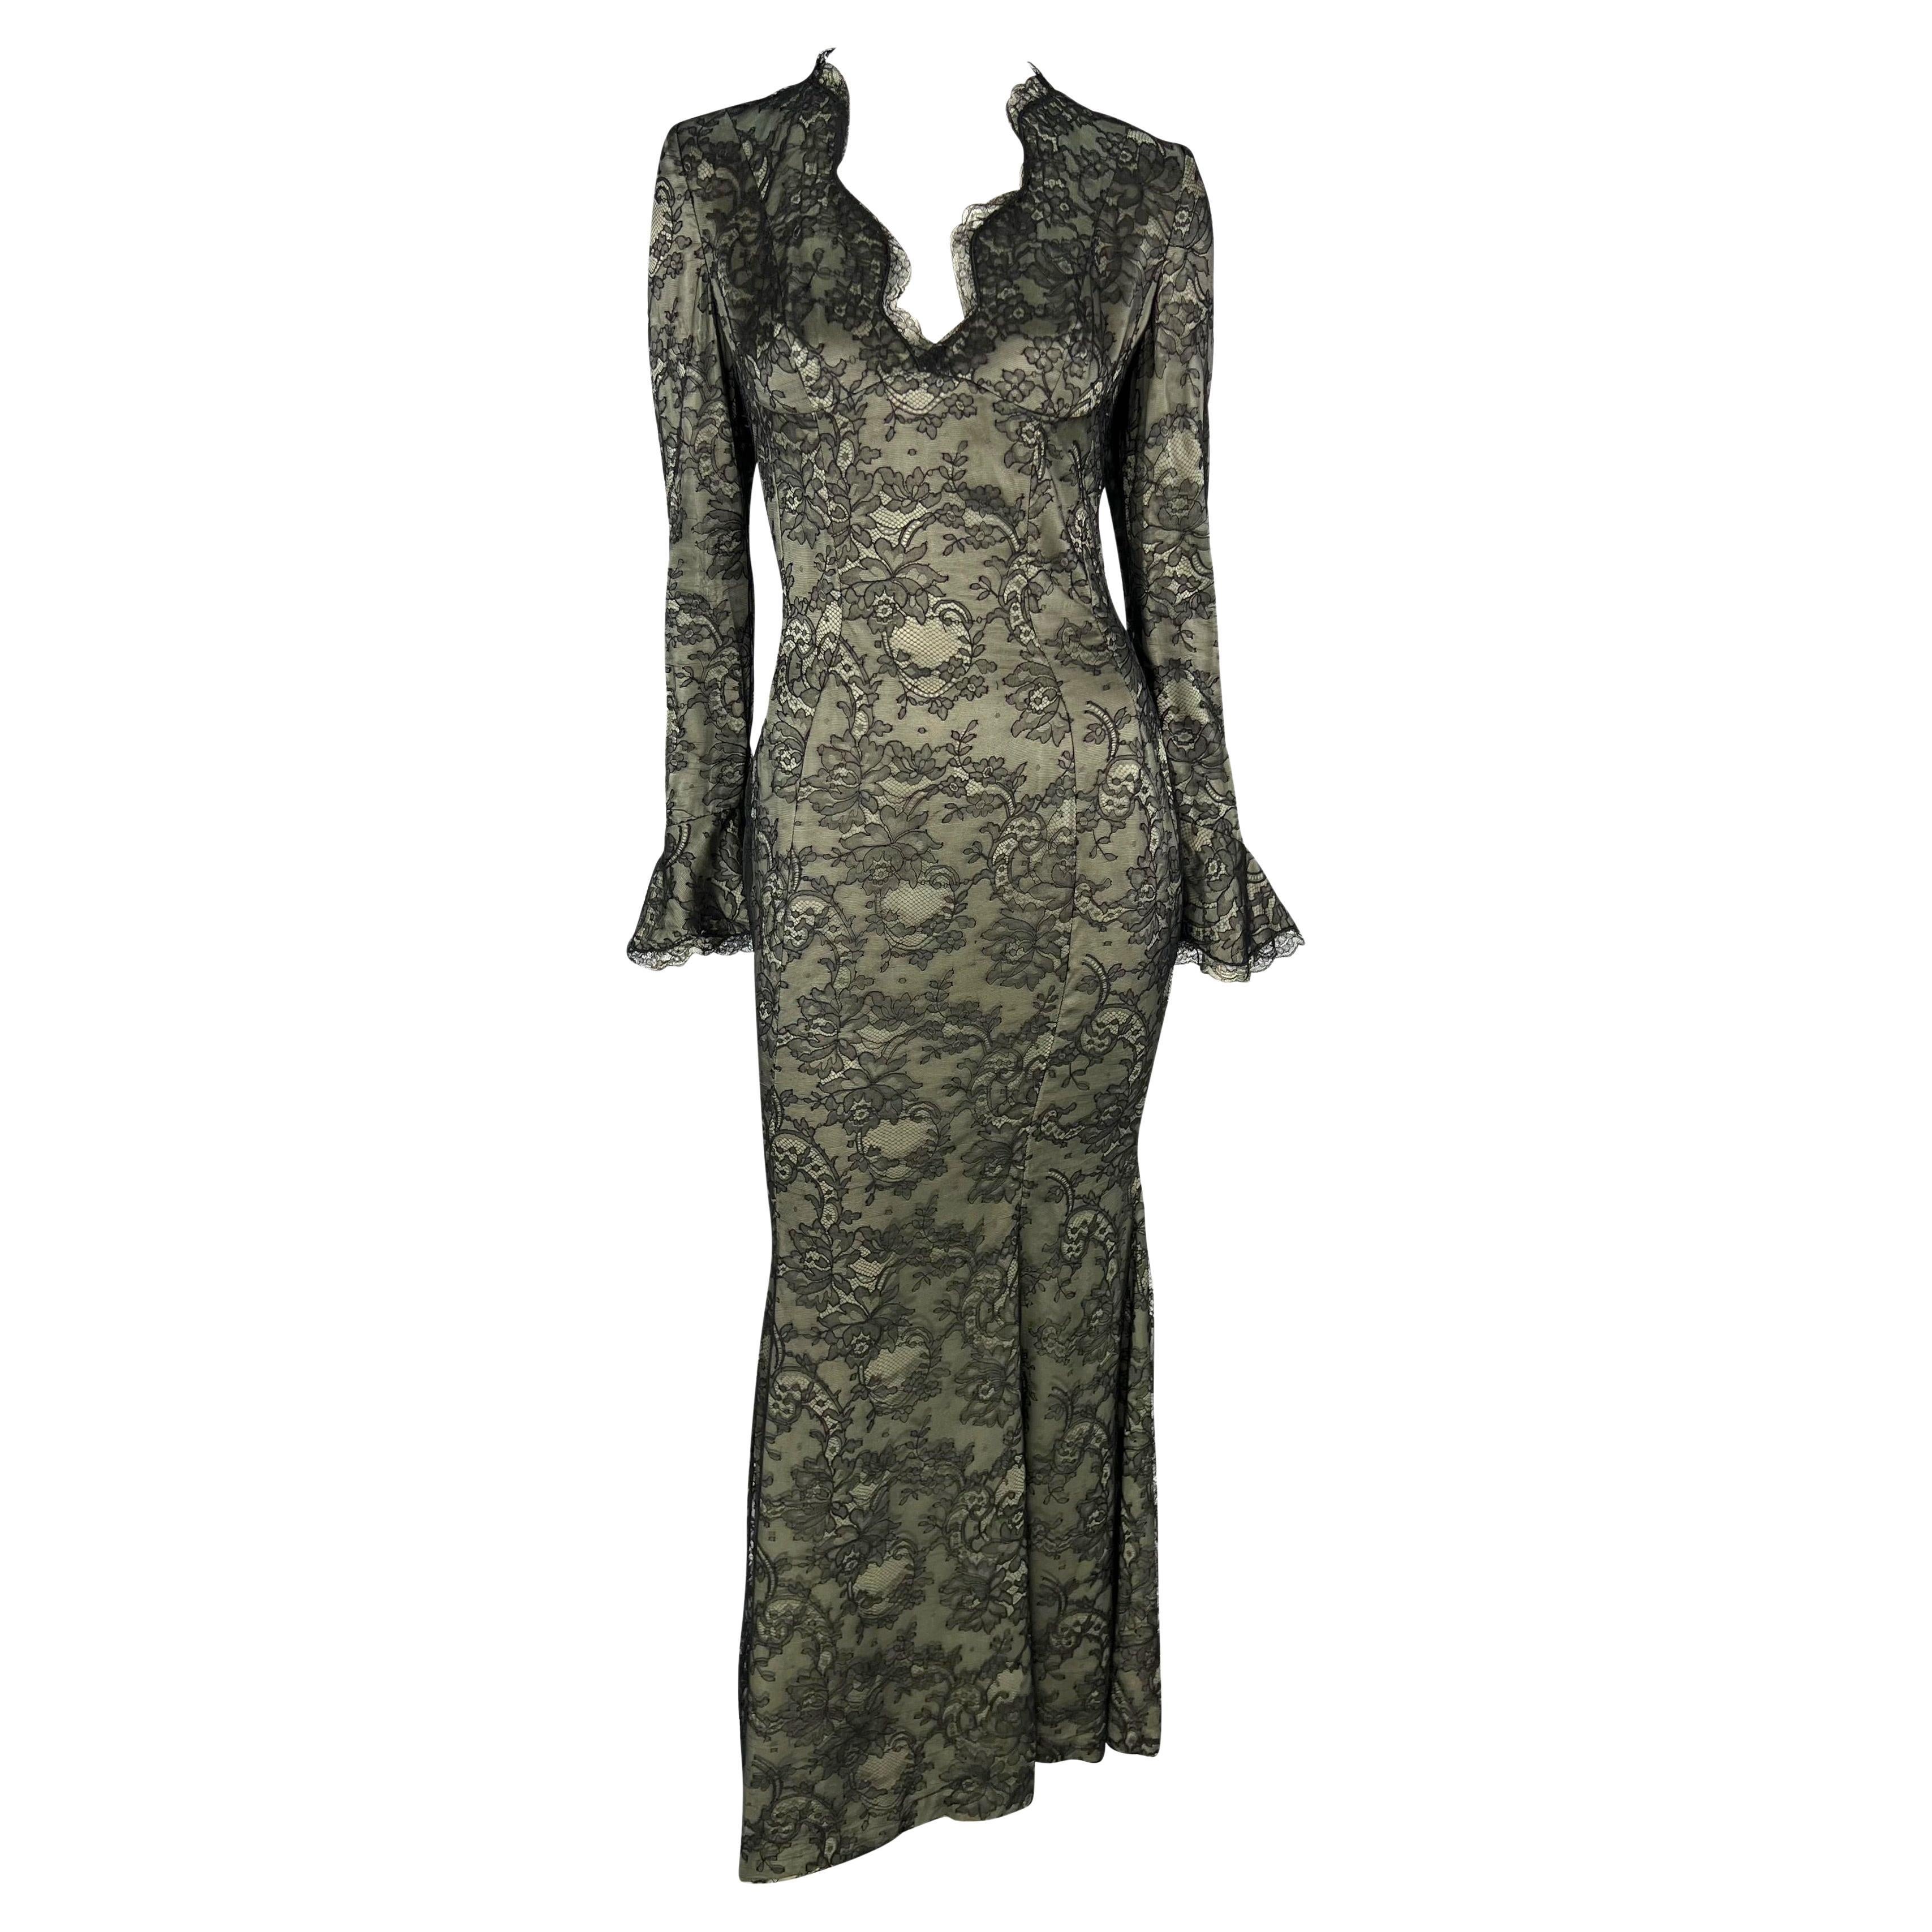 S/S 1995 Thierry Mugler Plunging Taupe Satin Black Floral Lace Overlay Gown For Sale